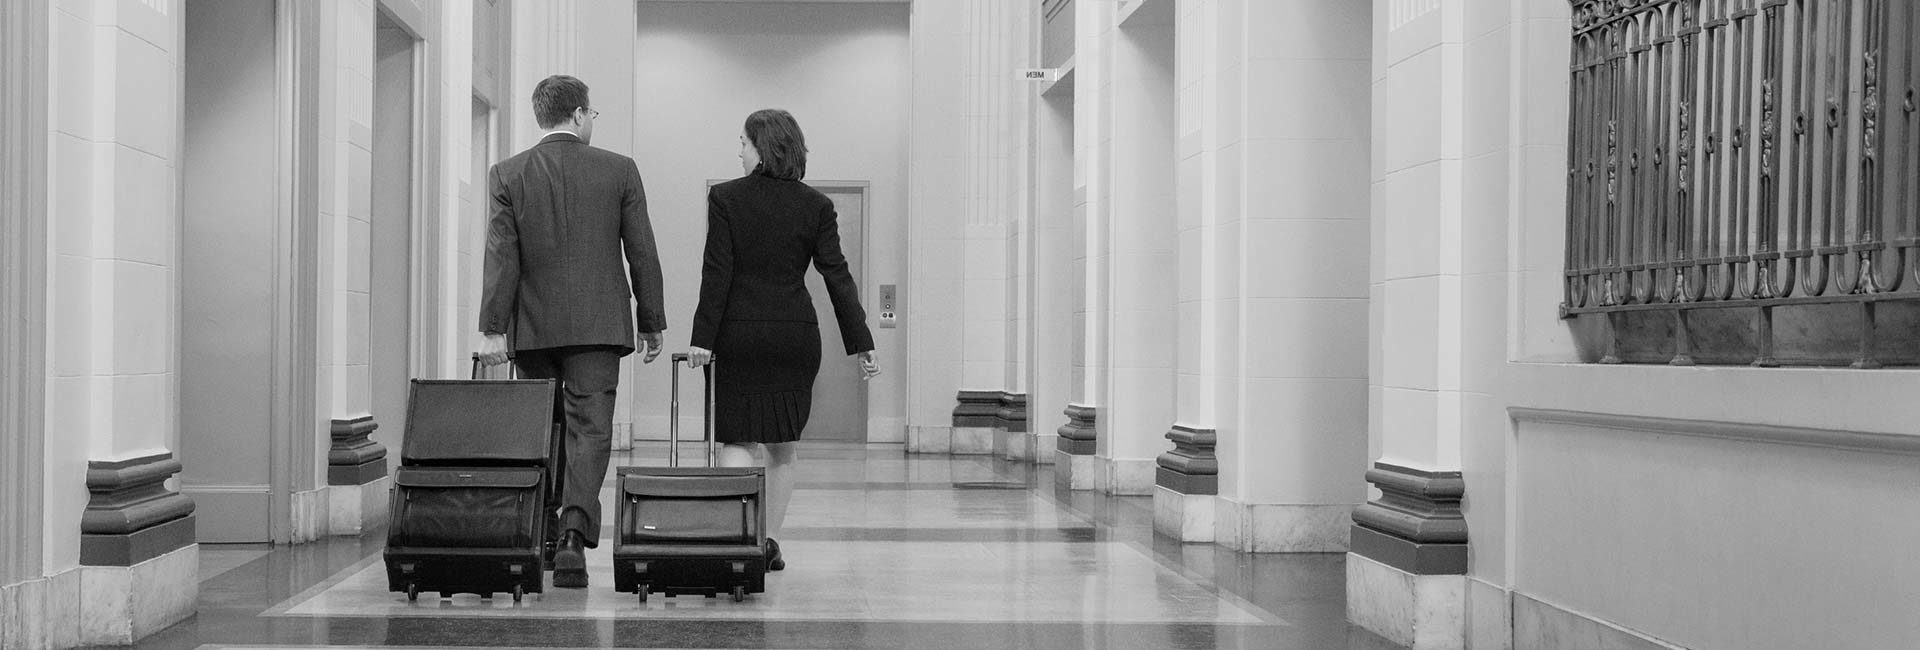 Attorneys with luggage walking down courtroom hallway